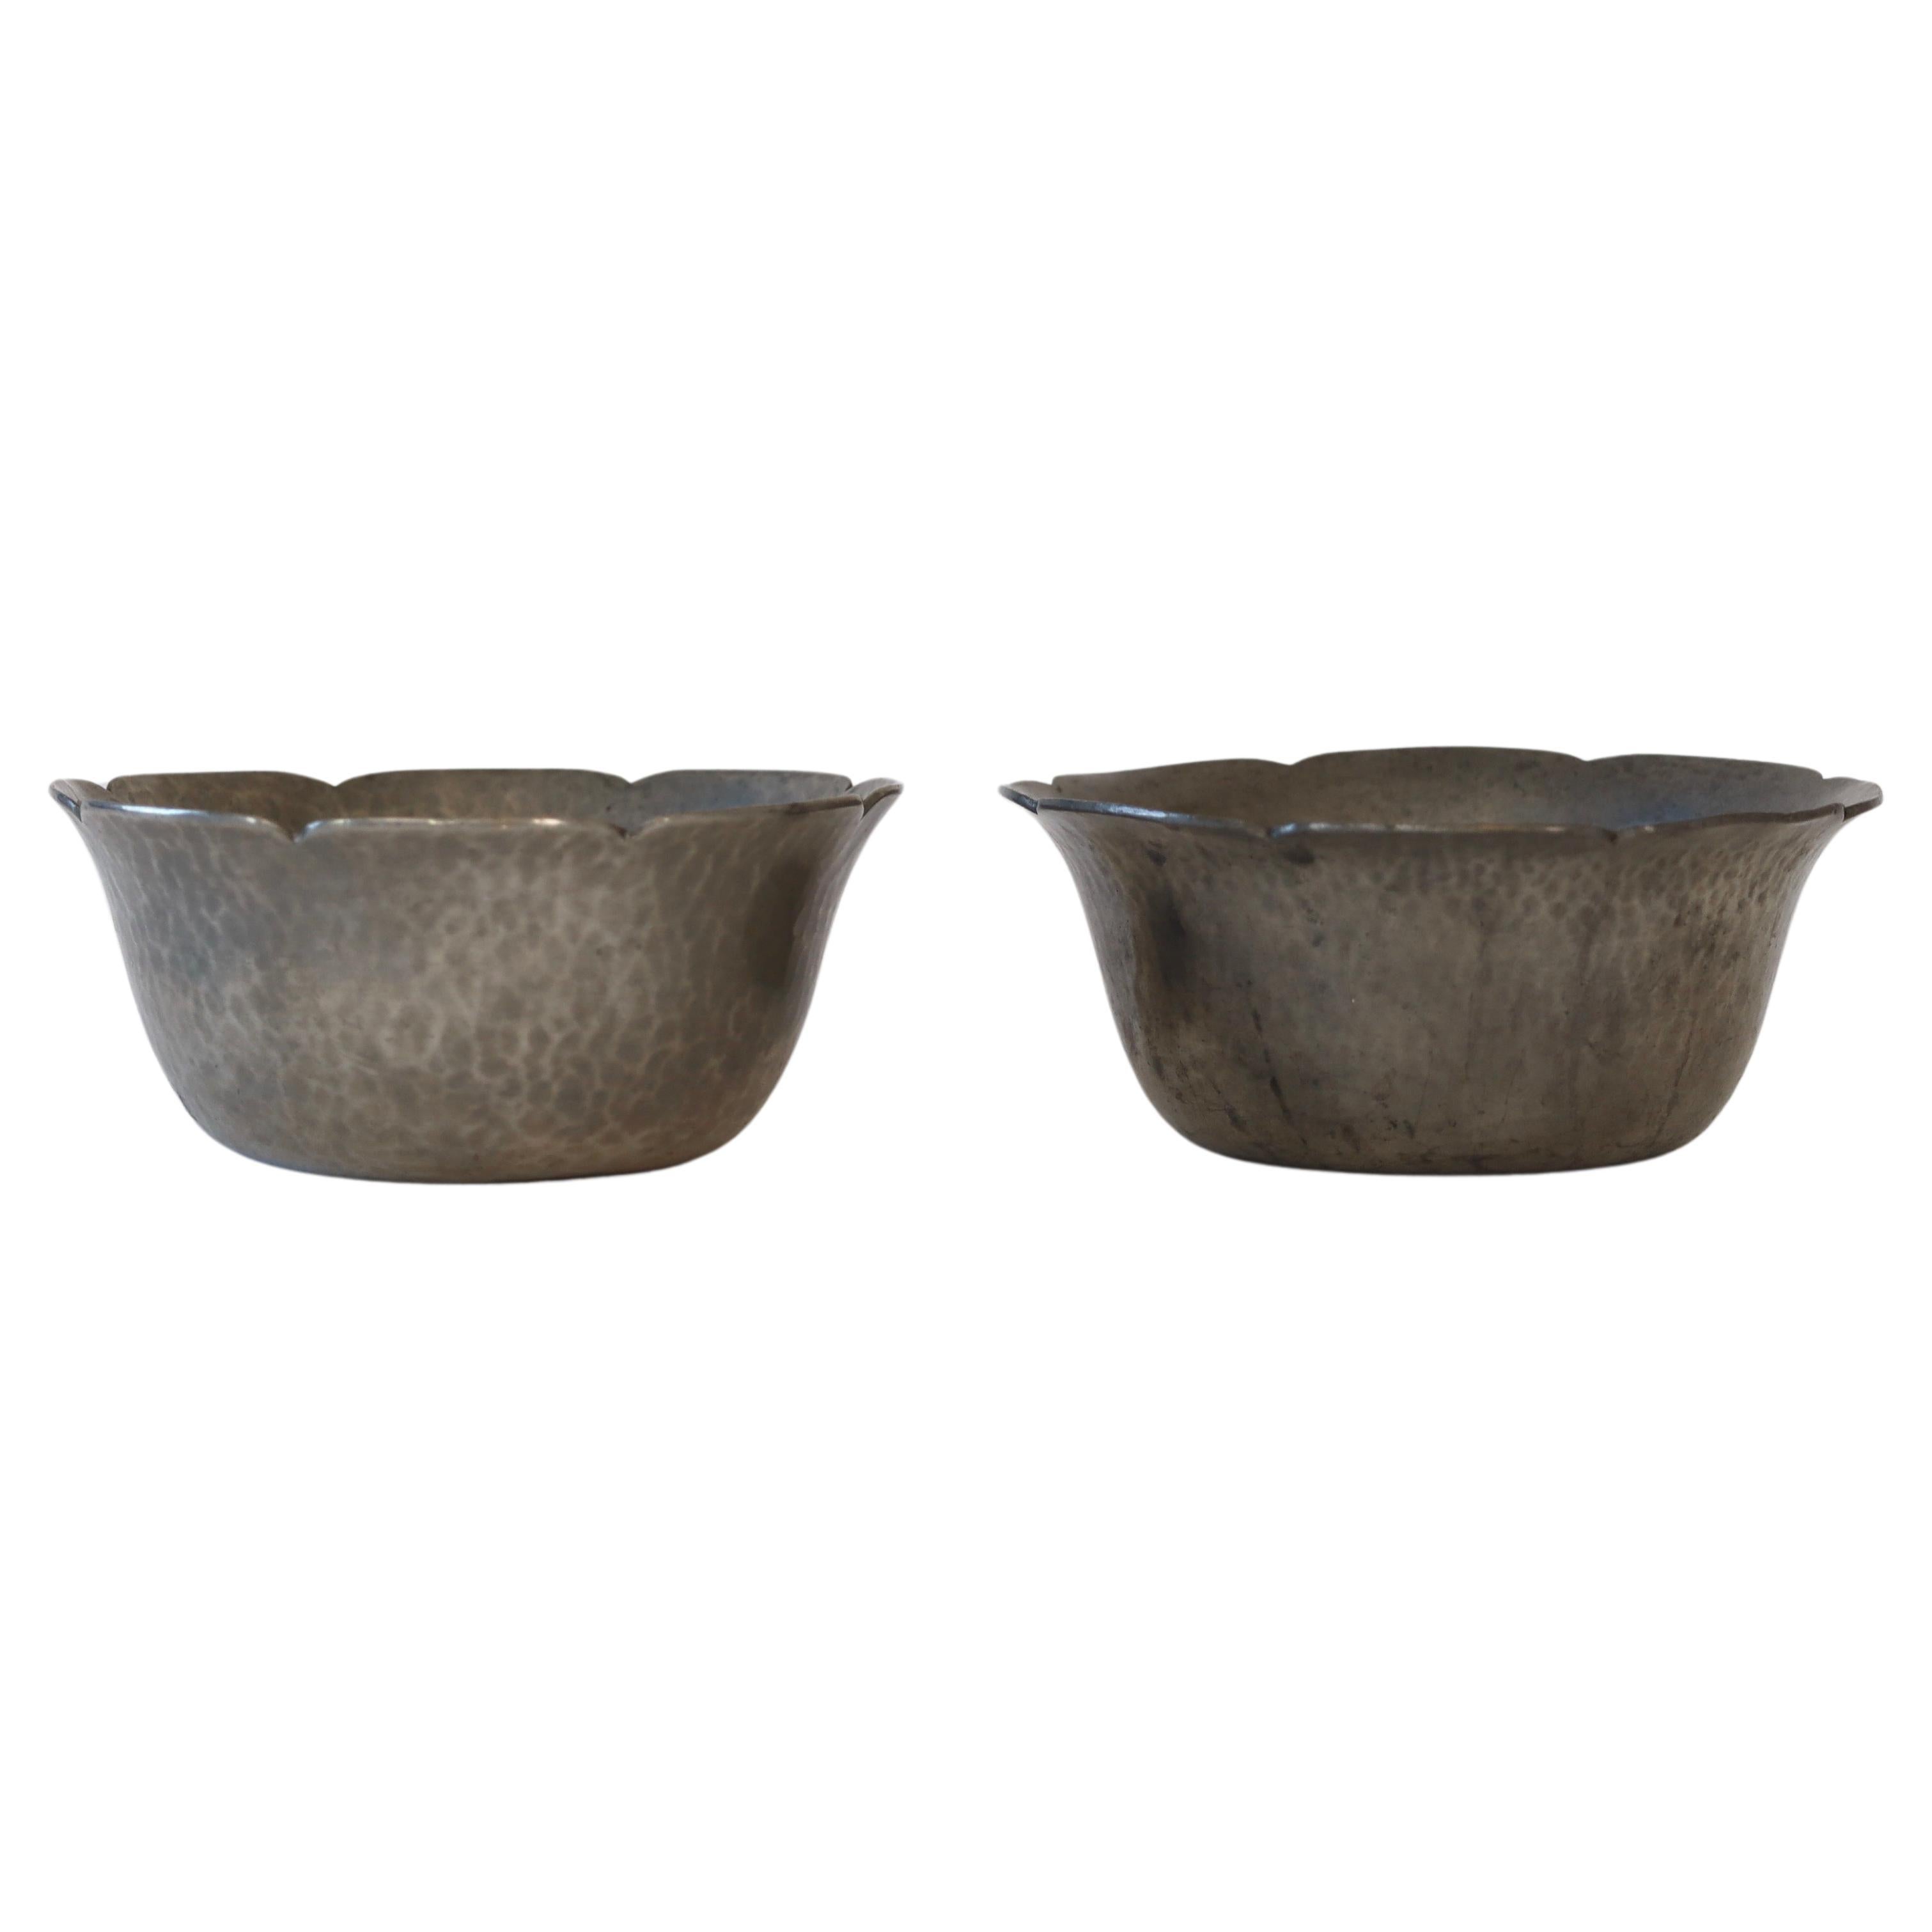 Set of hammered pewter bowls by Just Andersen, 1920s, Denmark For Sale